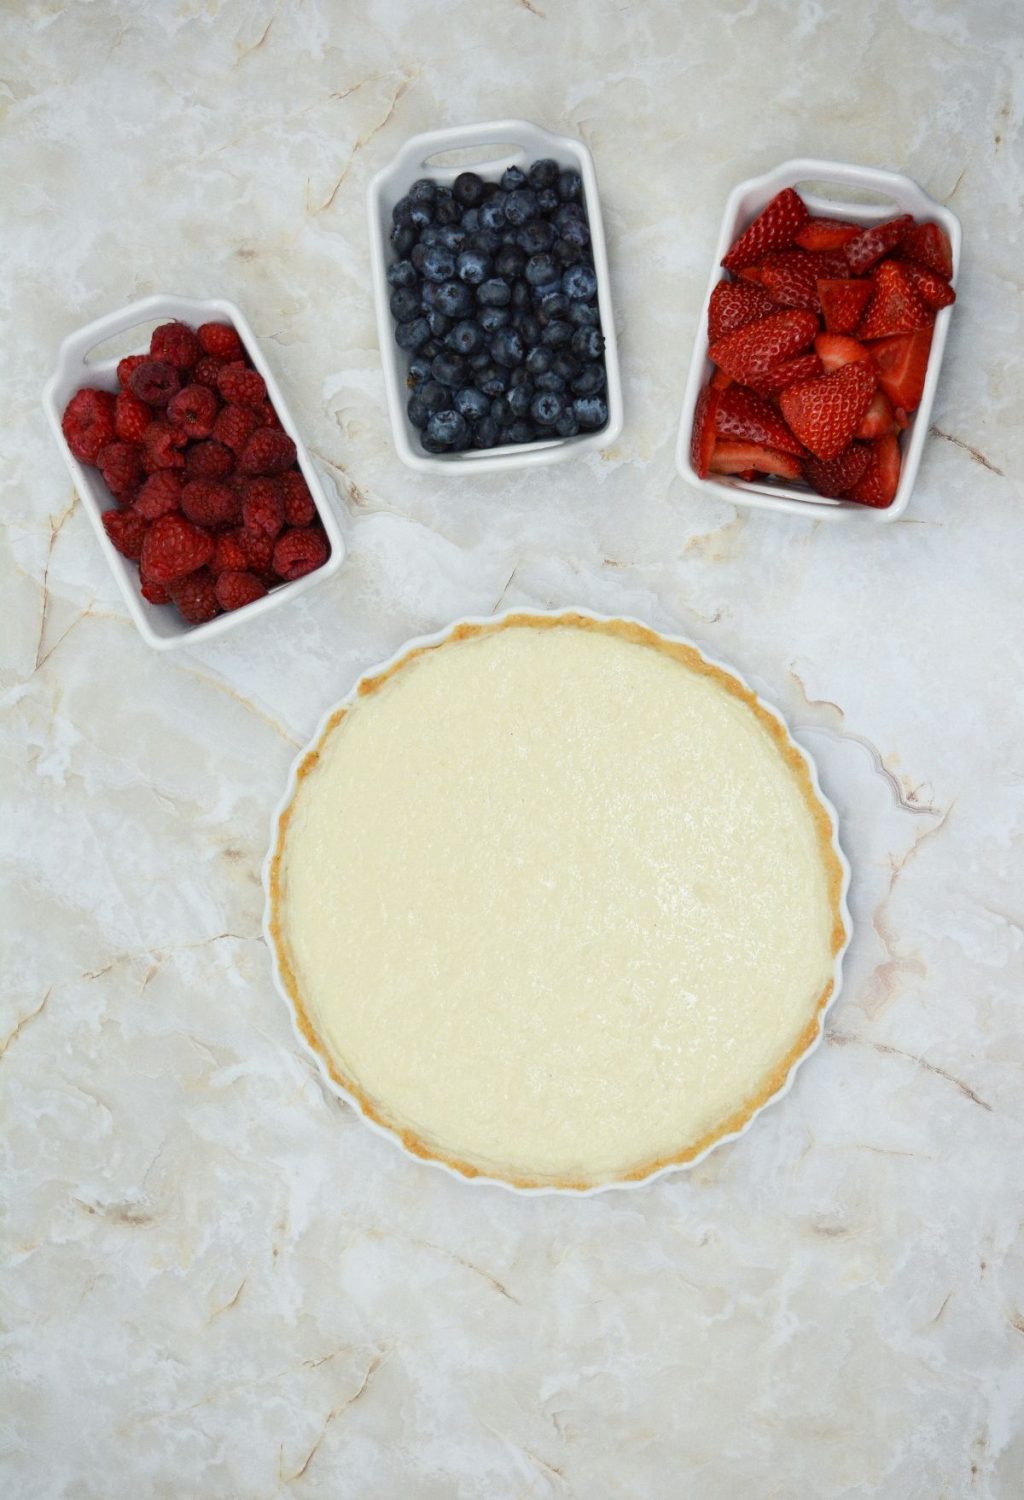 A pie with berries and cream in a white dish.